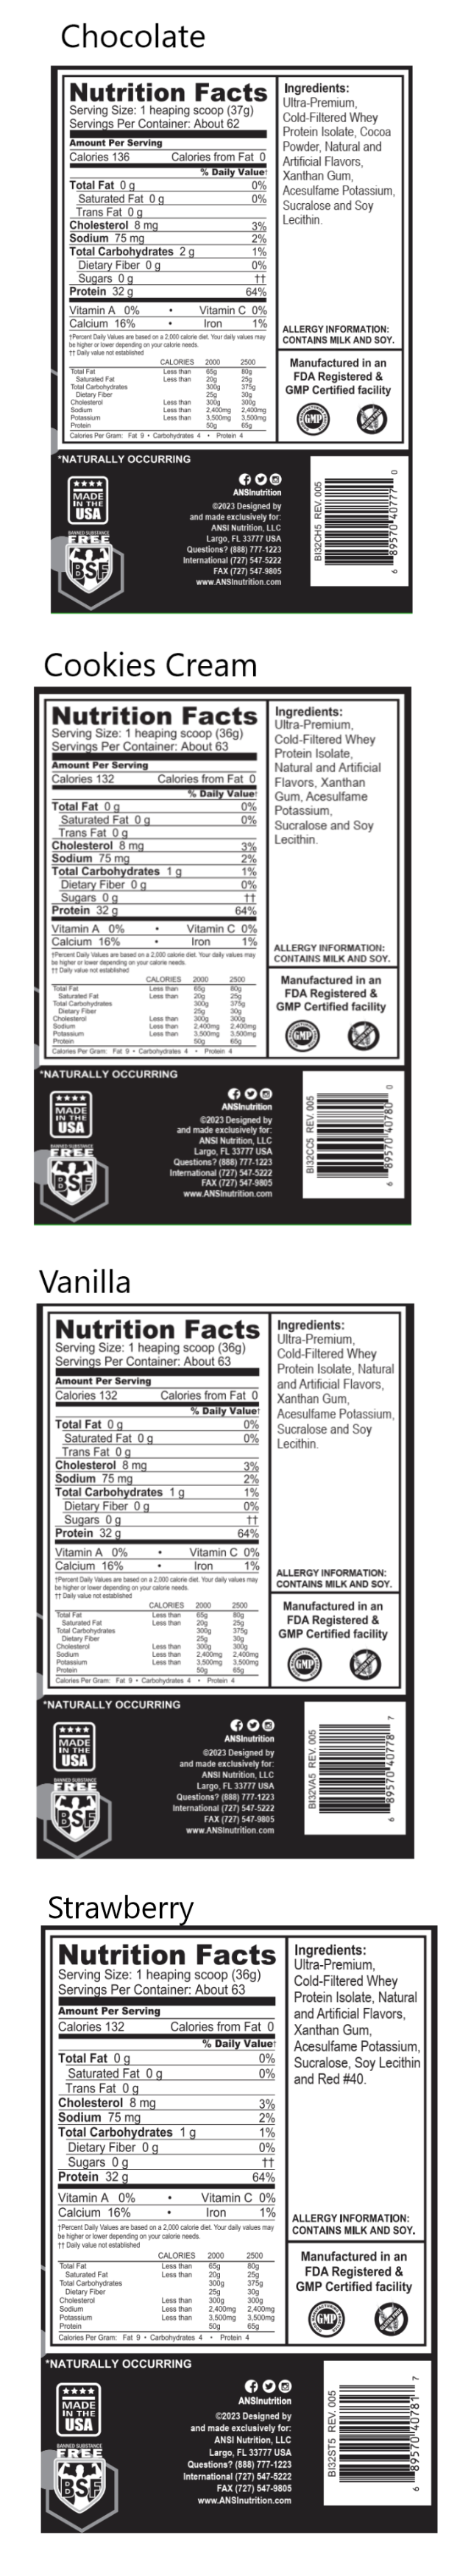 Nutrition facts for premium whey protein isolate with 32g protein, 136 calories, 0g fat, 1g carbs, and 8mg cholesterol per 37g scoop. Contains milk and soy.